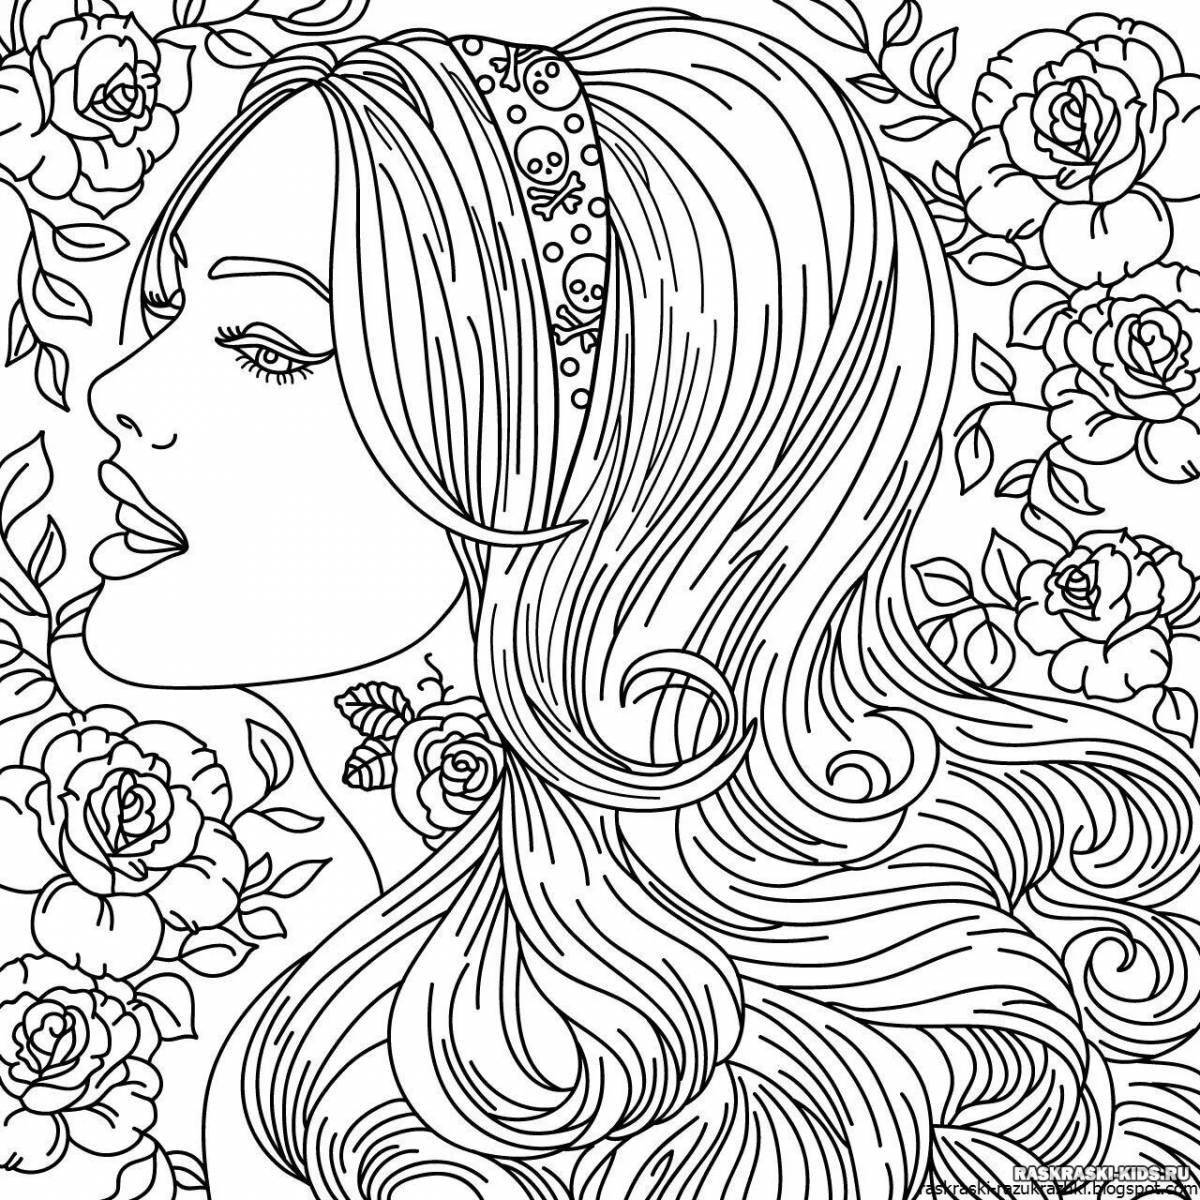 Fun coloring book for 12-13 year olds